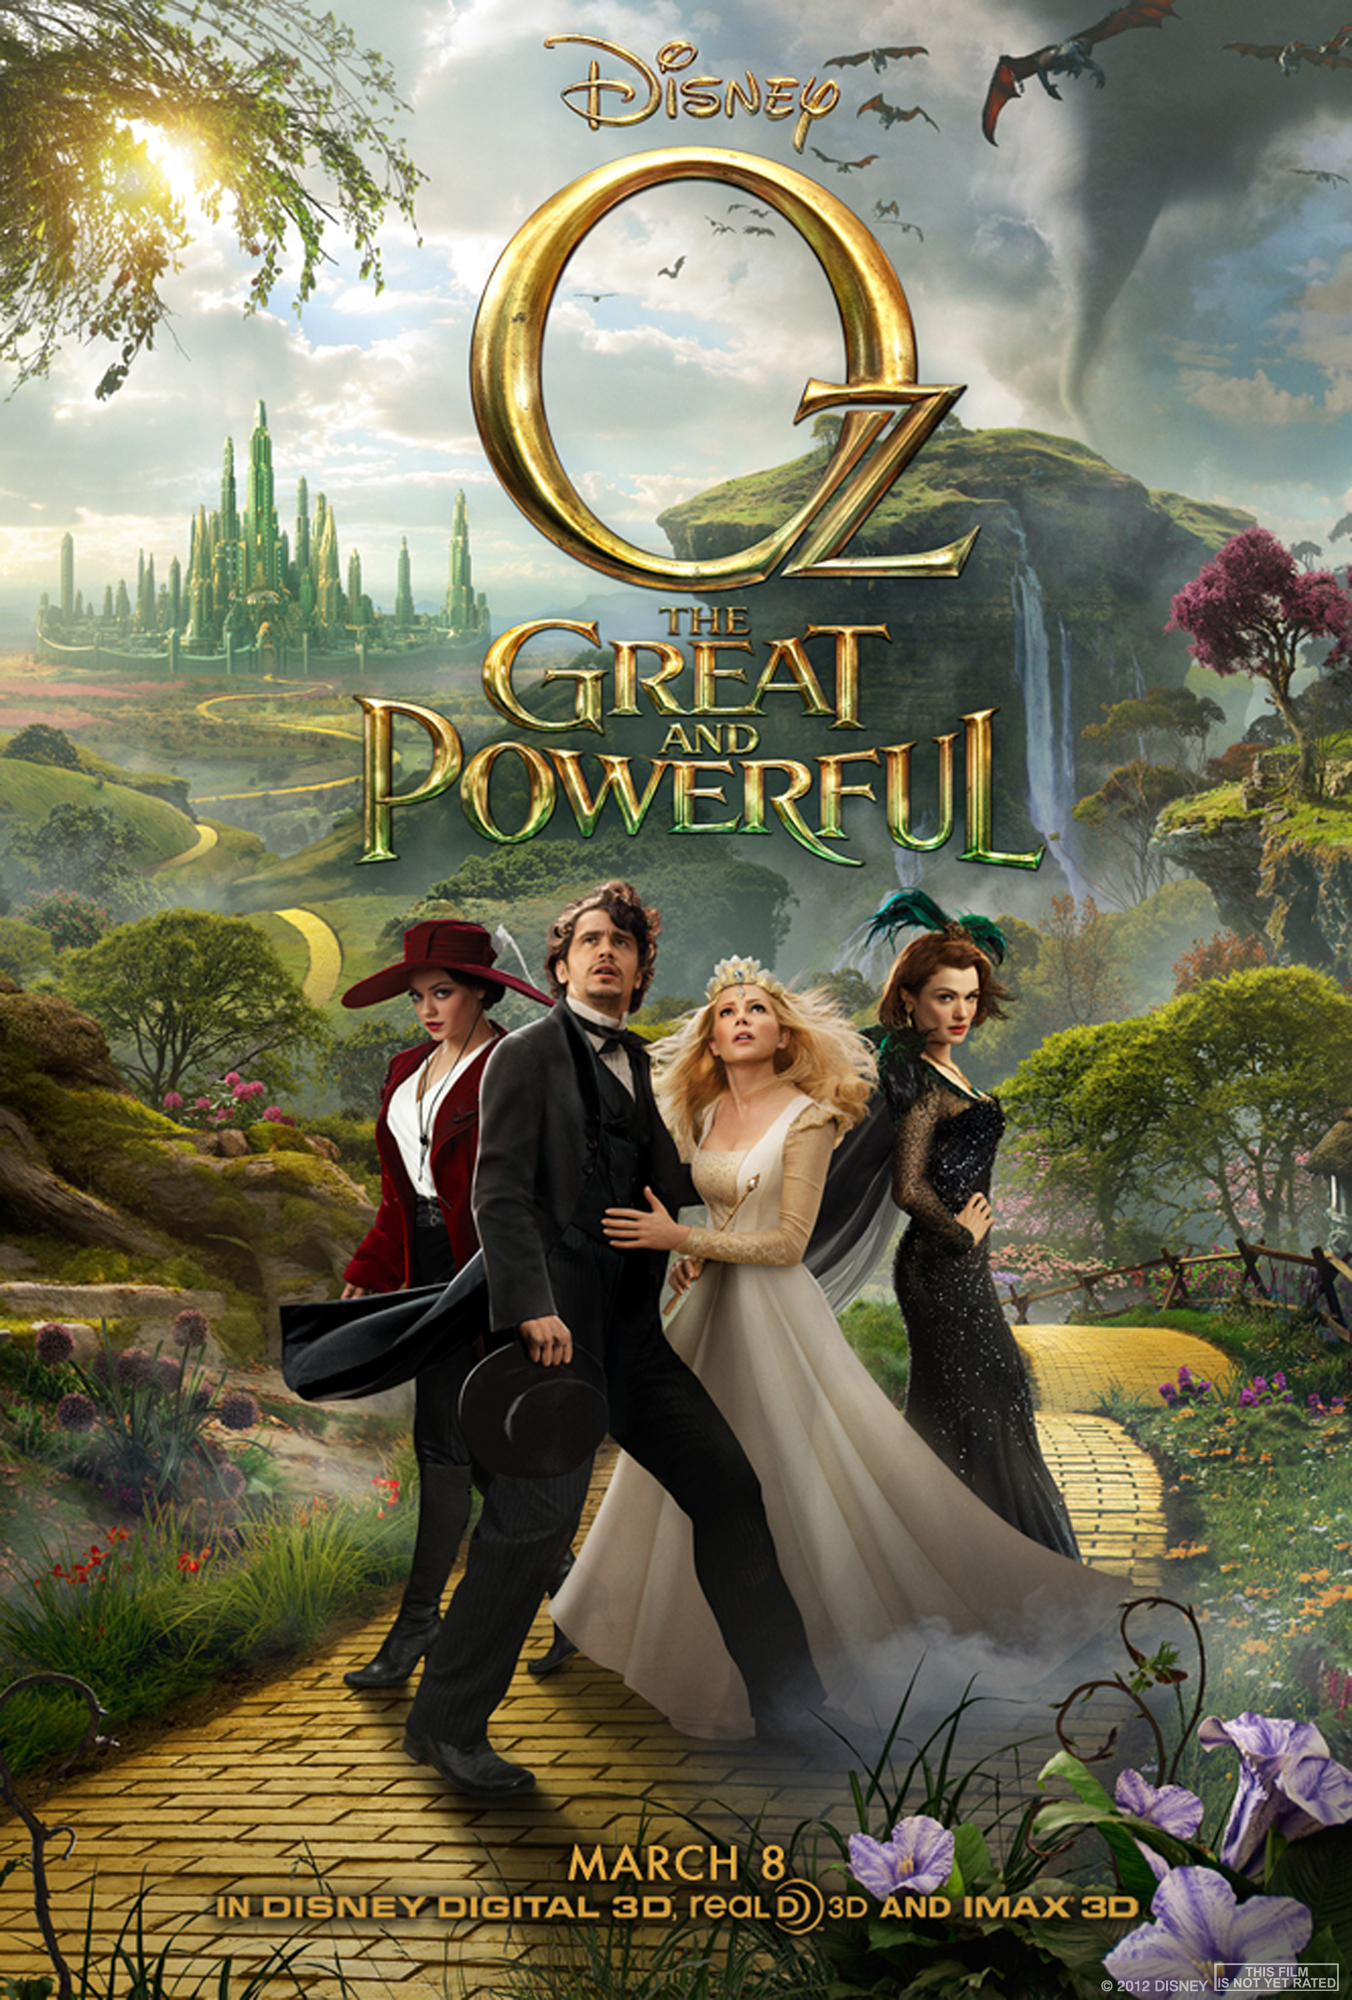 Oz the great powerful